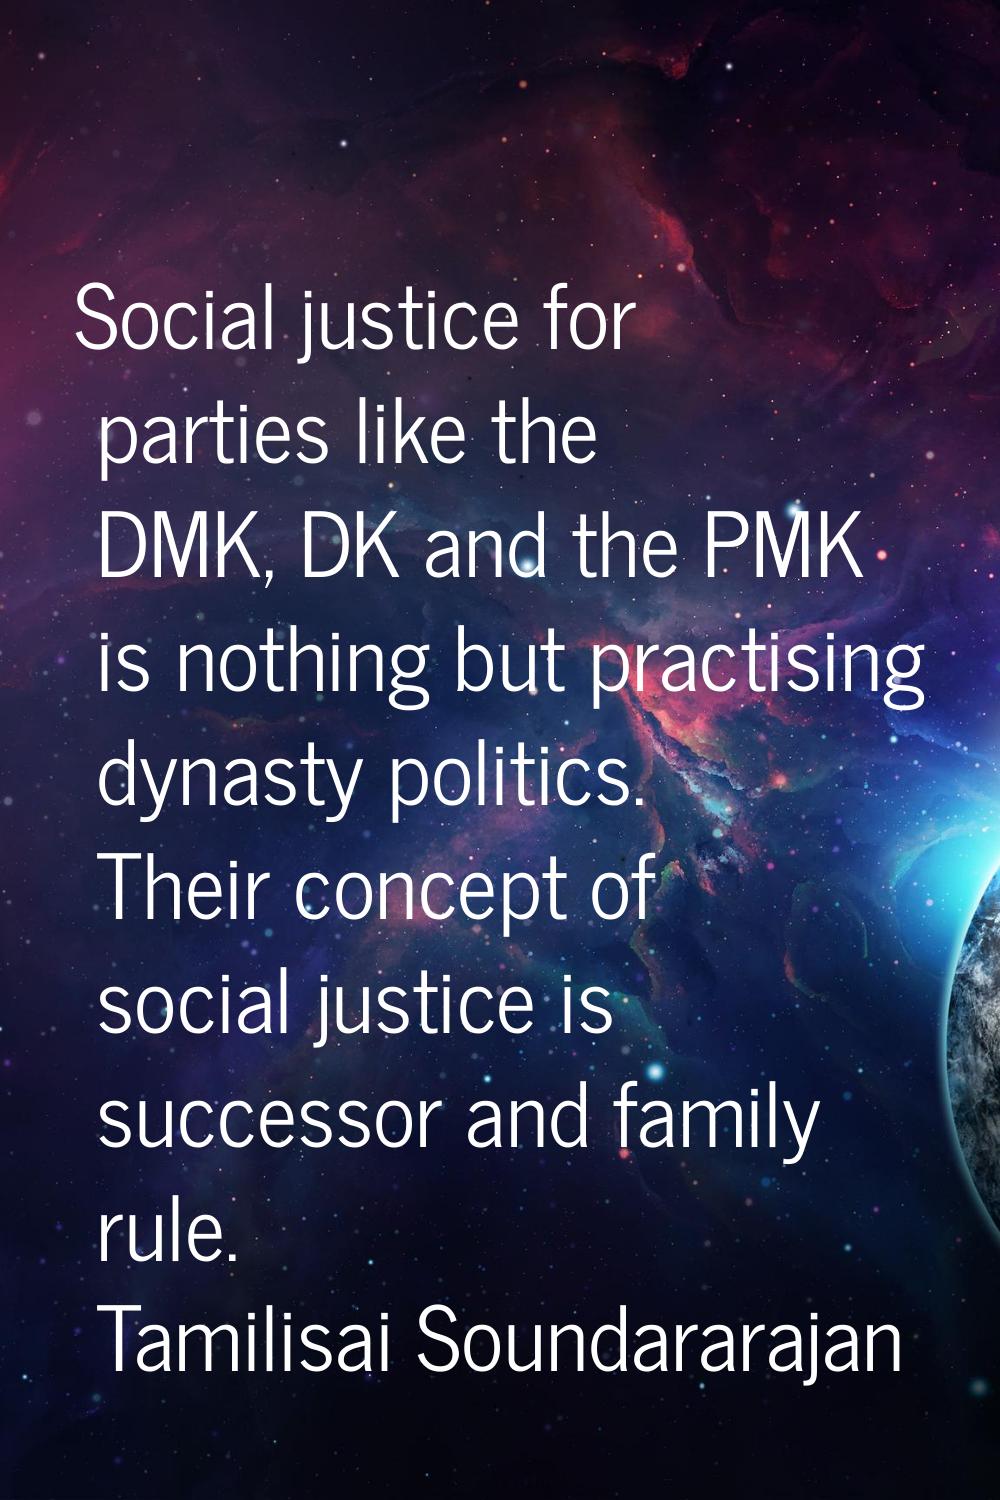 Social justice for parties like the DMK, DK and the PMK is nothing but practising dynasty politics.